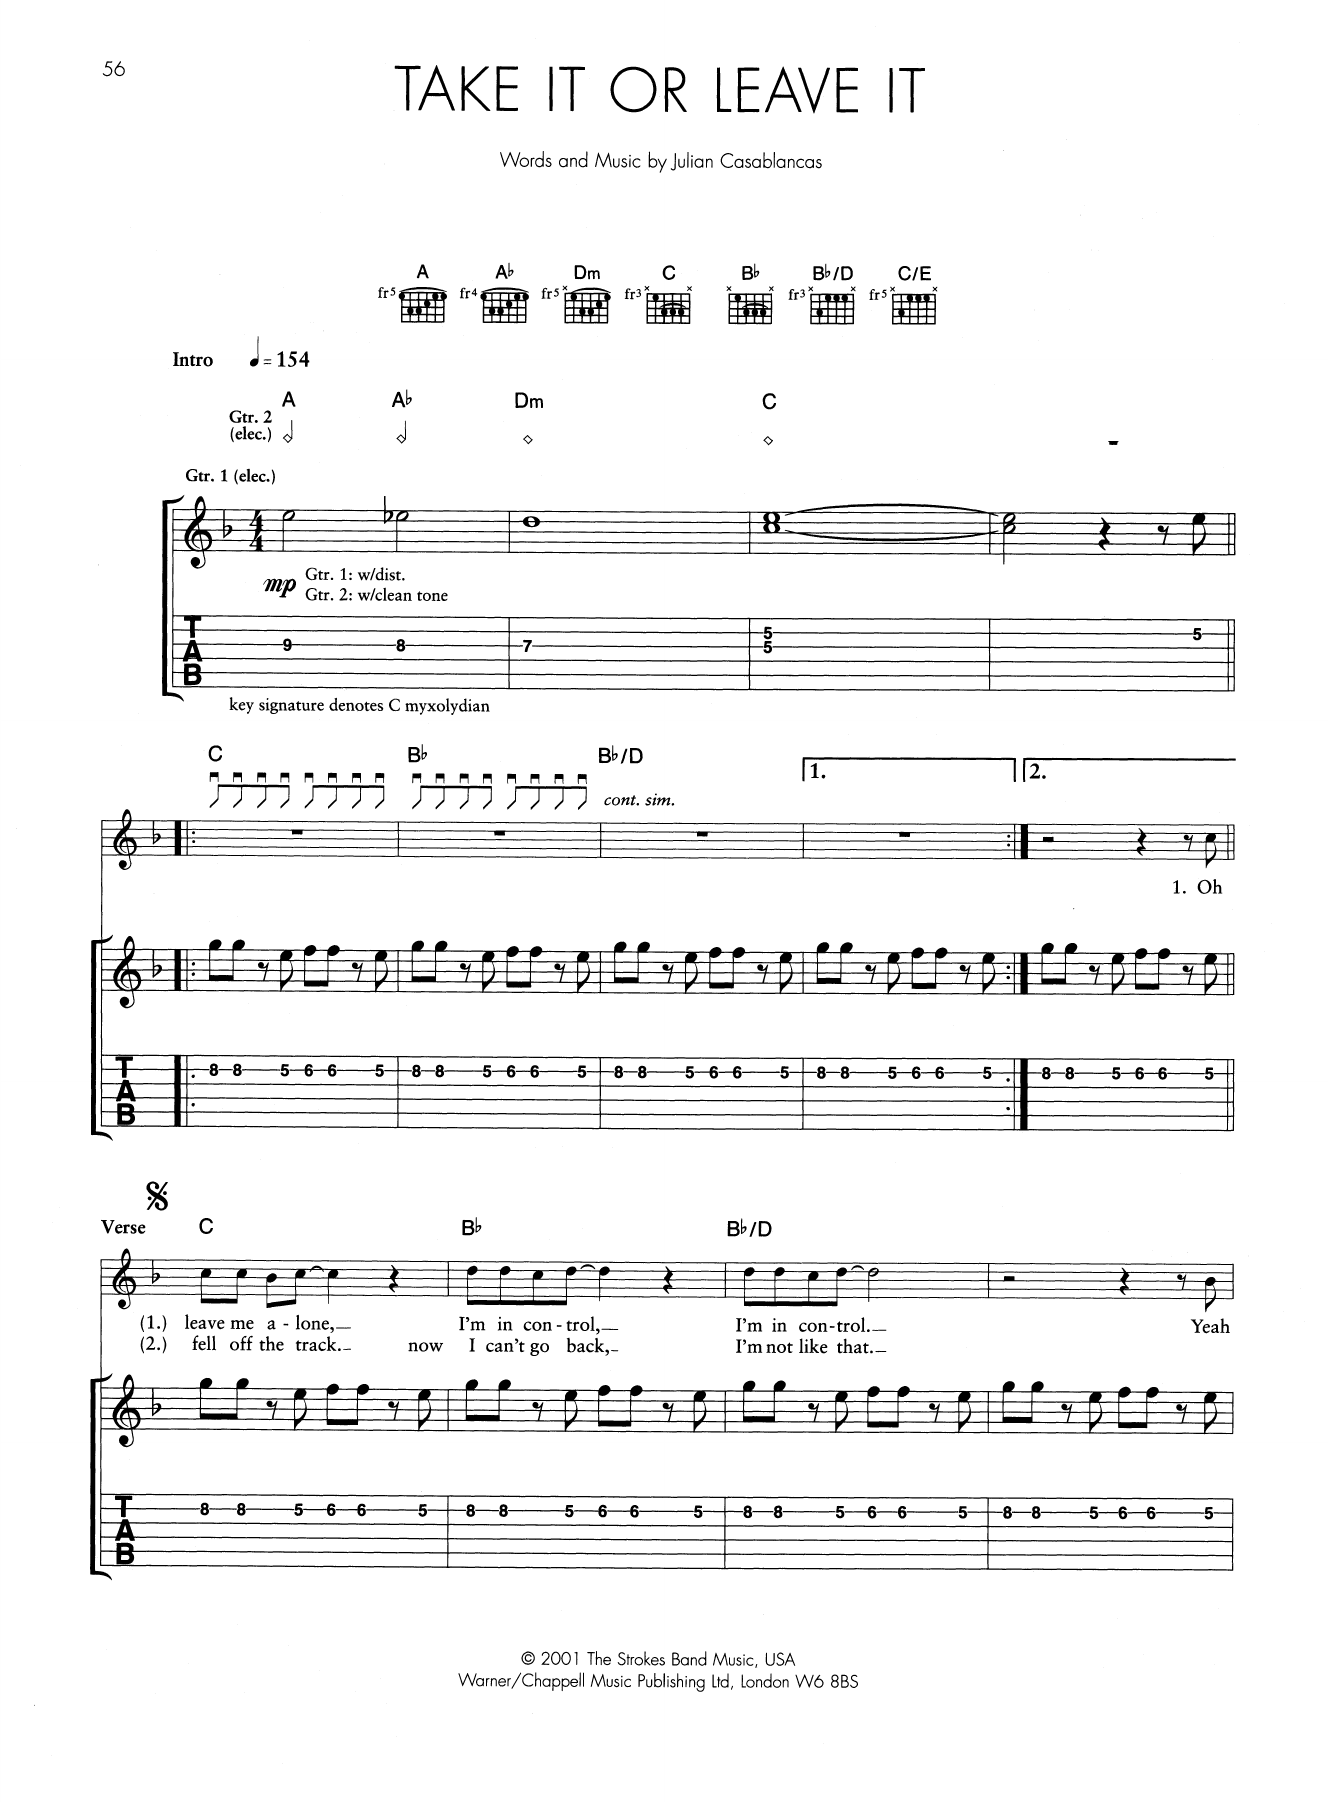 Download The Strokes Take It Or Leave It Sheet Music